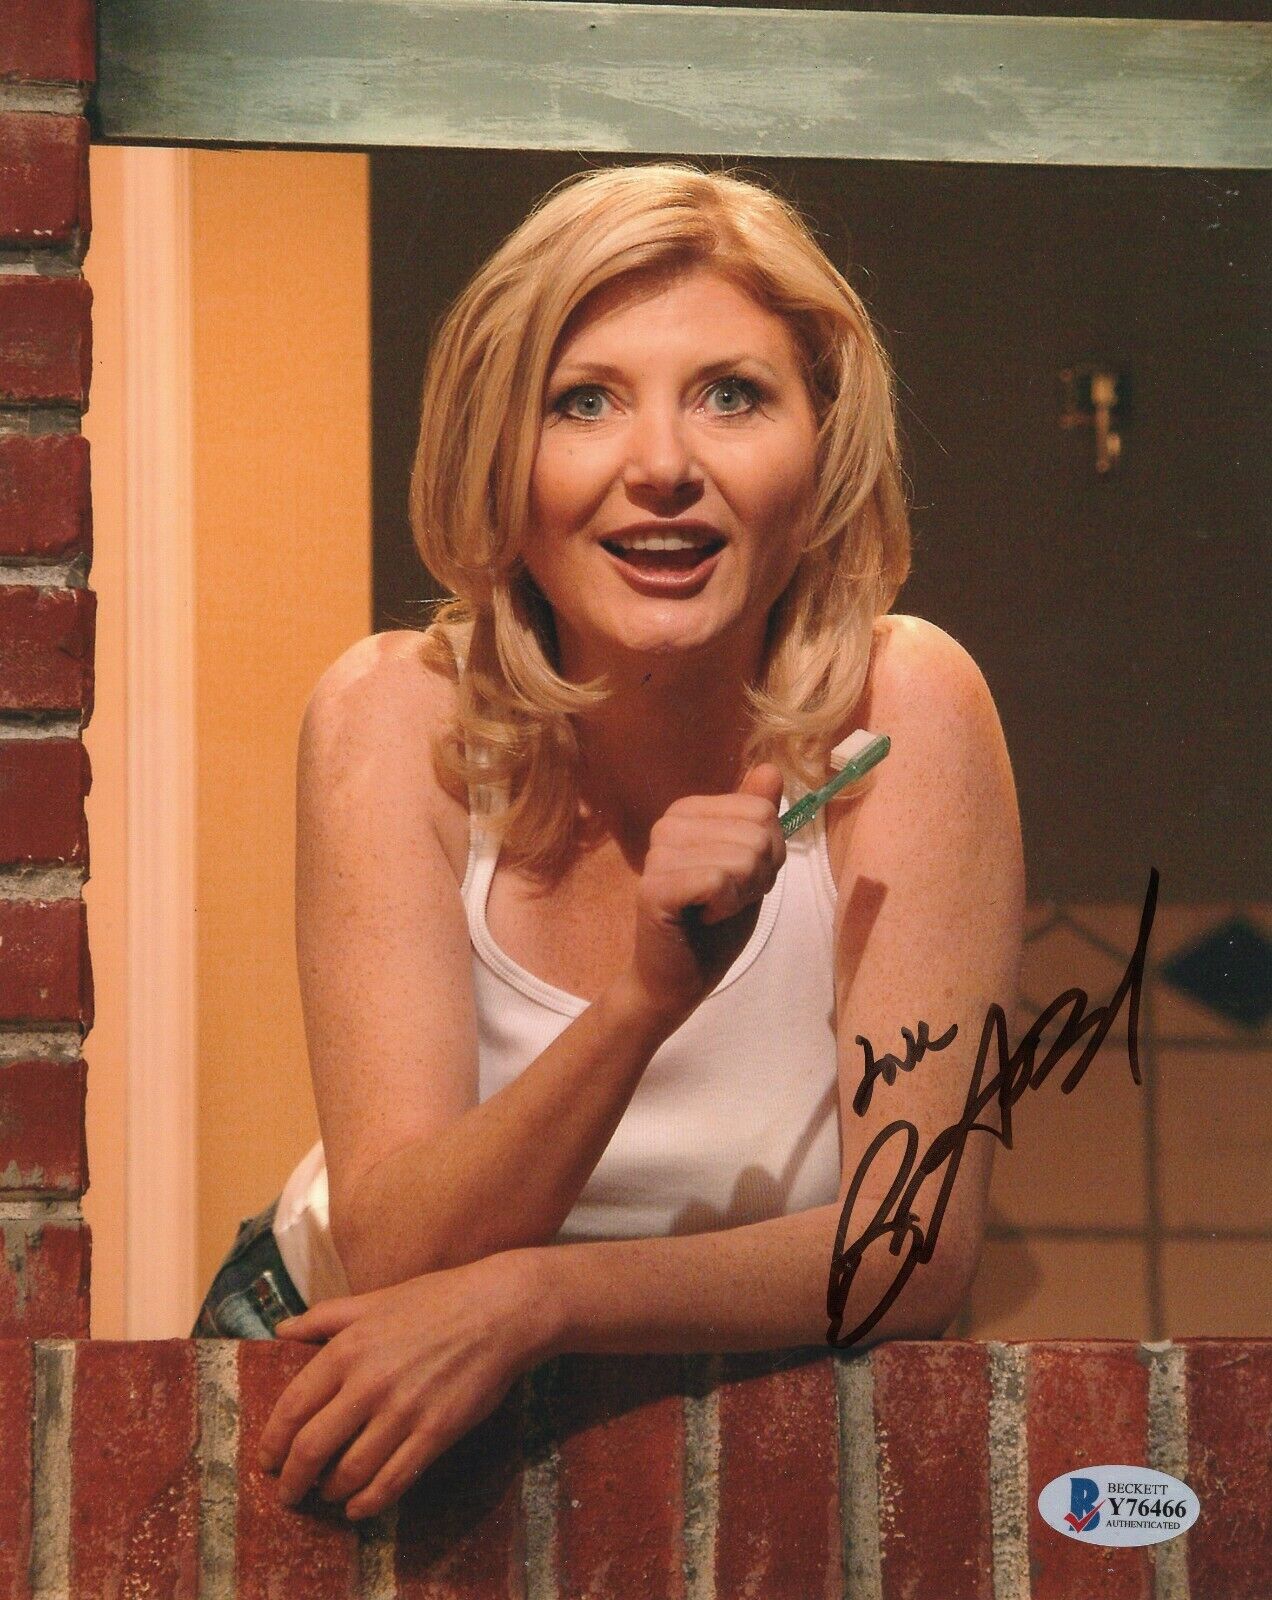 Beth Broderick Sabrina the Teenage Witch Signed 8x10 Photo Poster painting w/Beckett COA Y76466